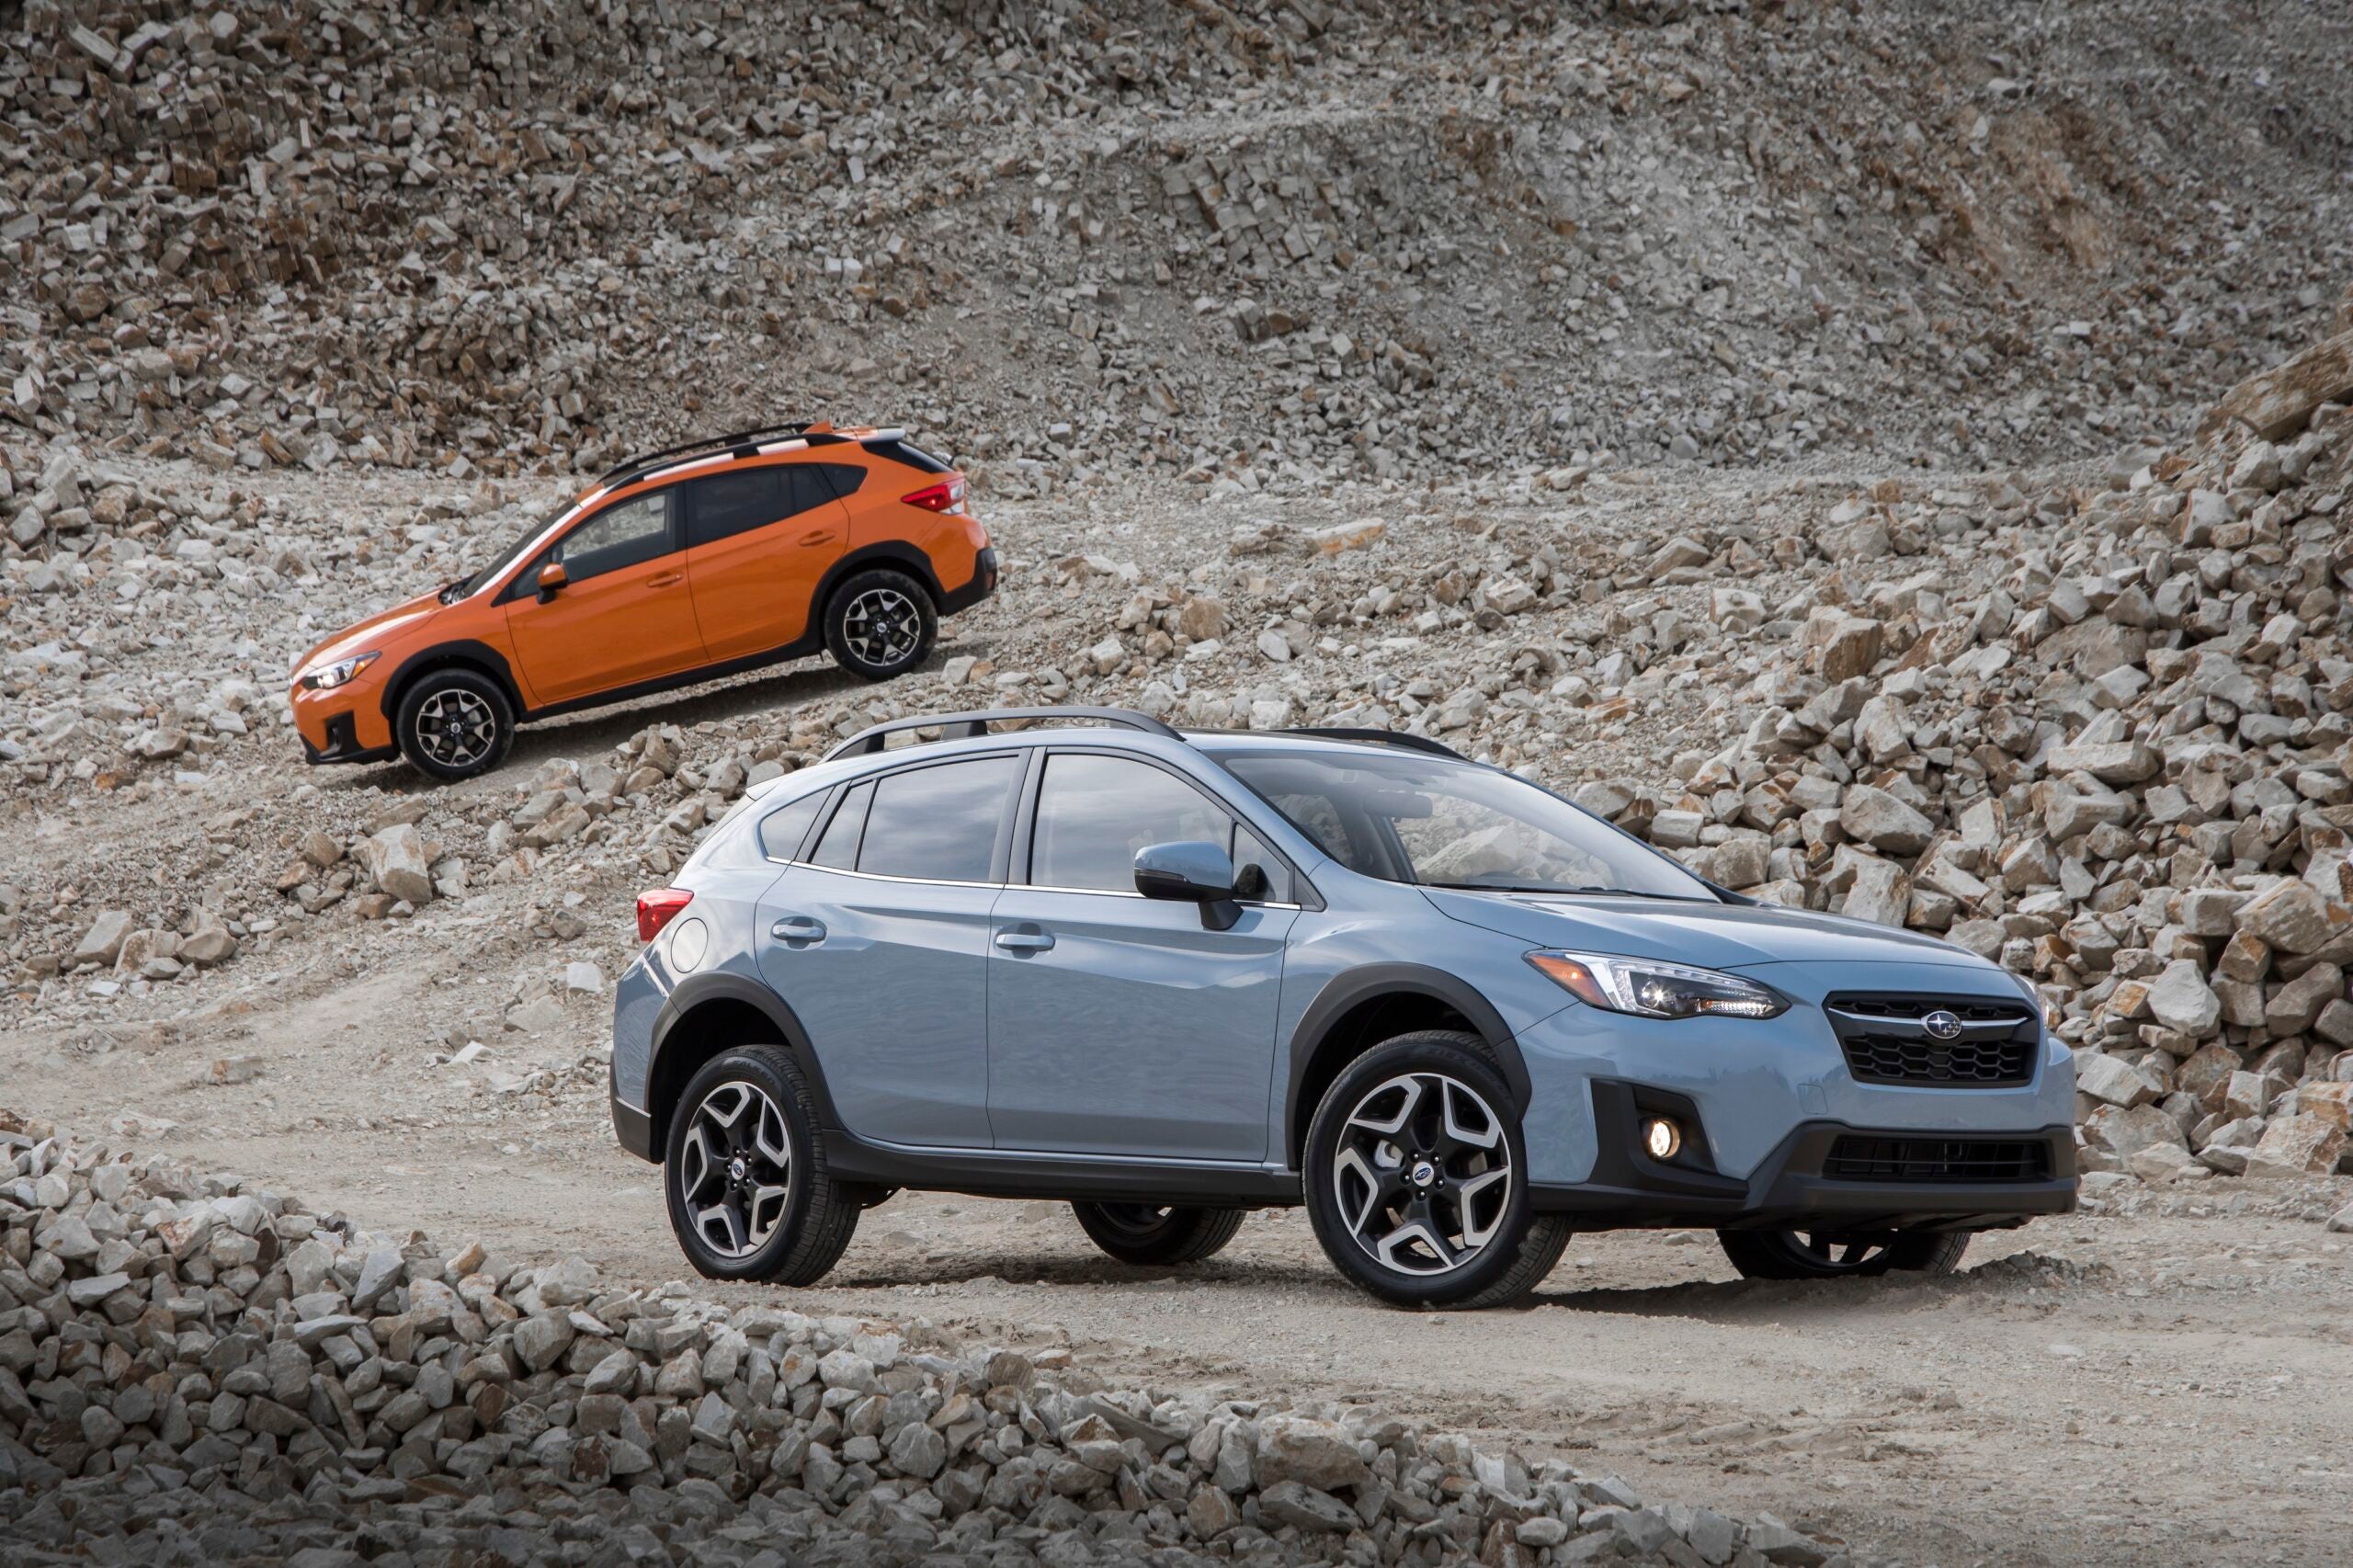 The all-new 2018 Subaru Crosstrek is a crossover ready to off-road